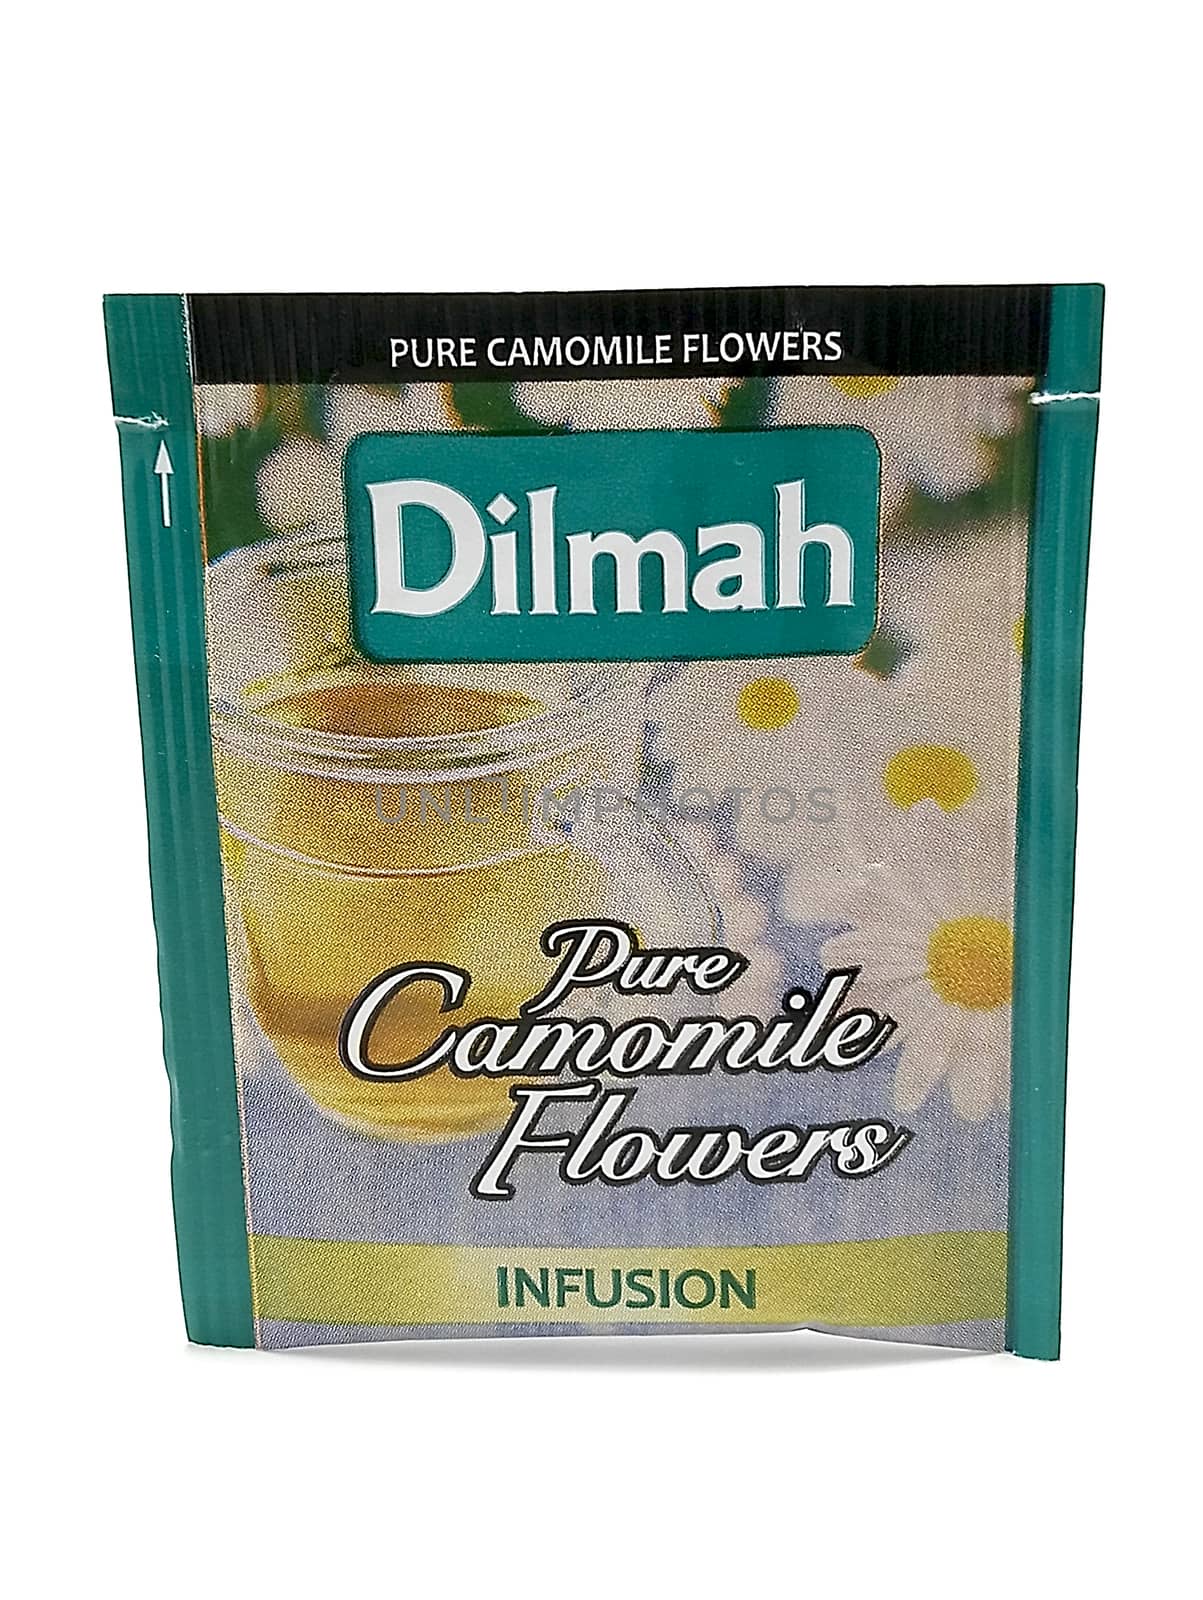 Dilmah pure camomile flowers infusion tea in Manila, Philippines by imwaltersy